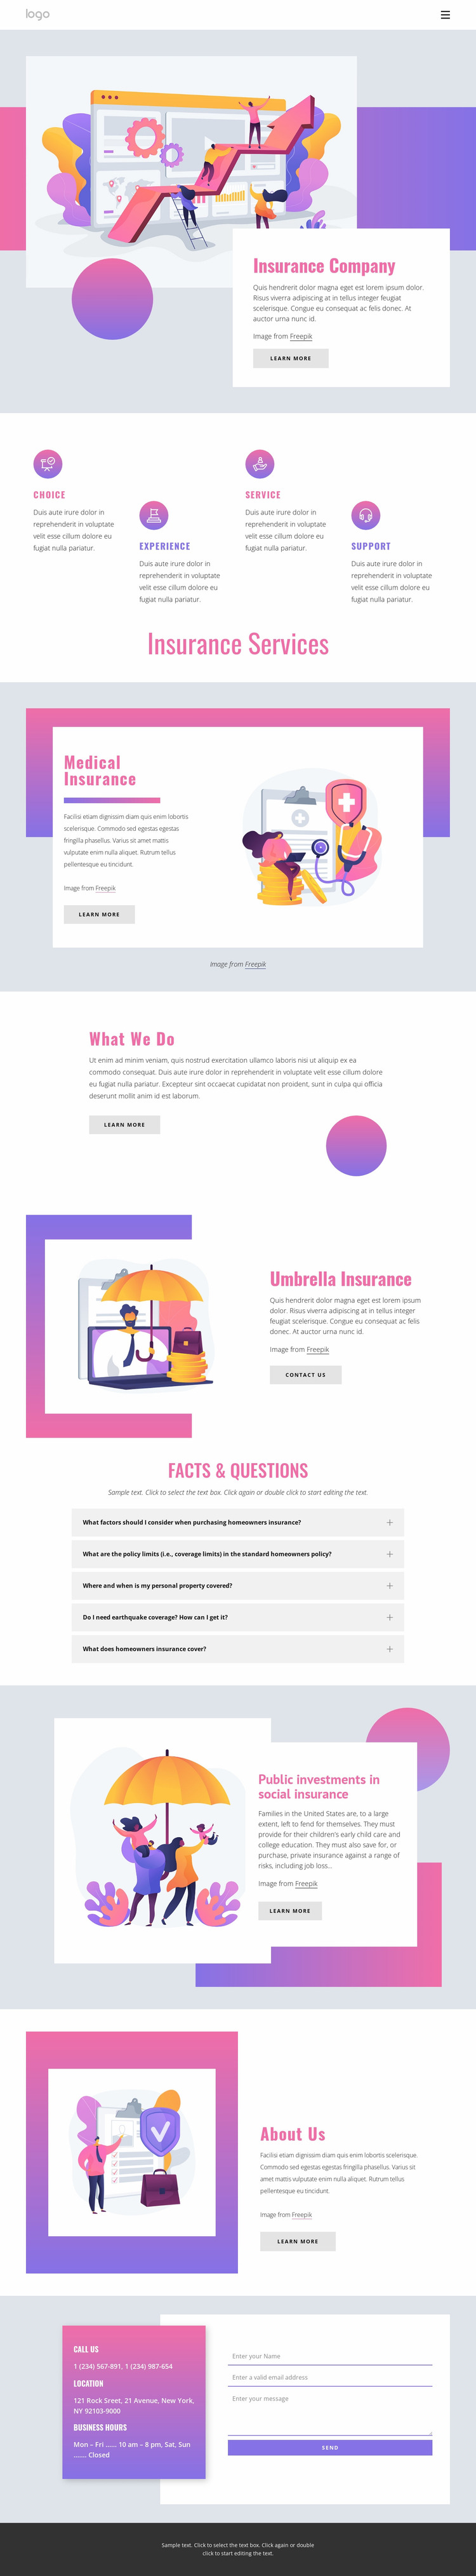 Your consultant for all business risks Website Mockup